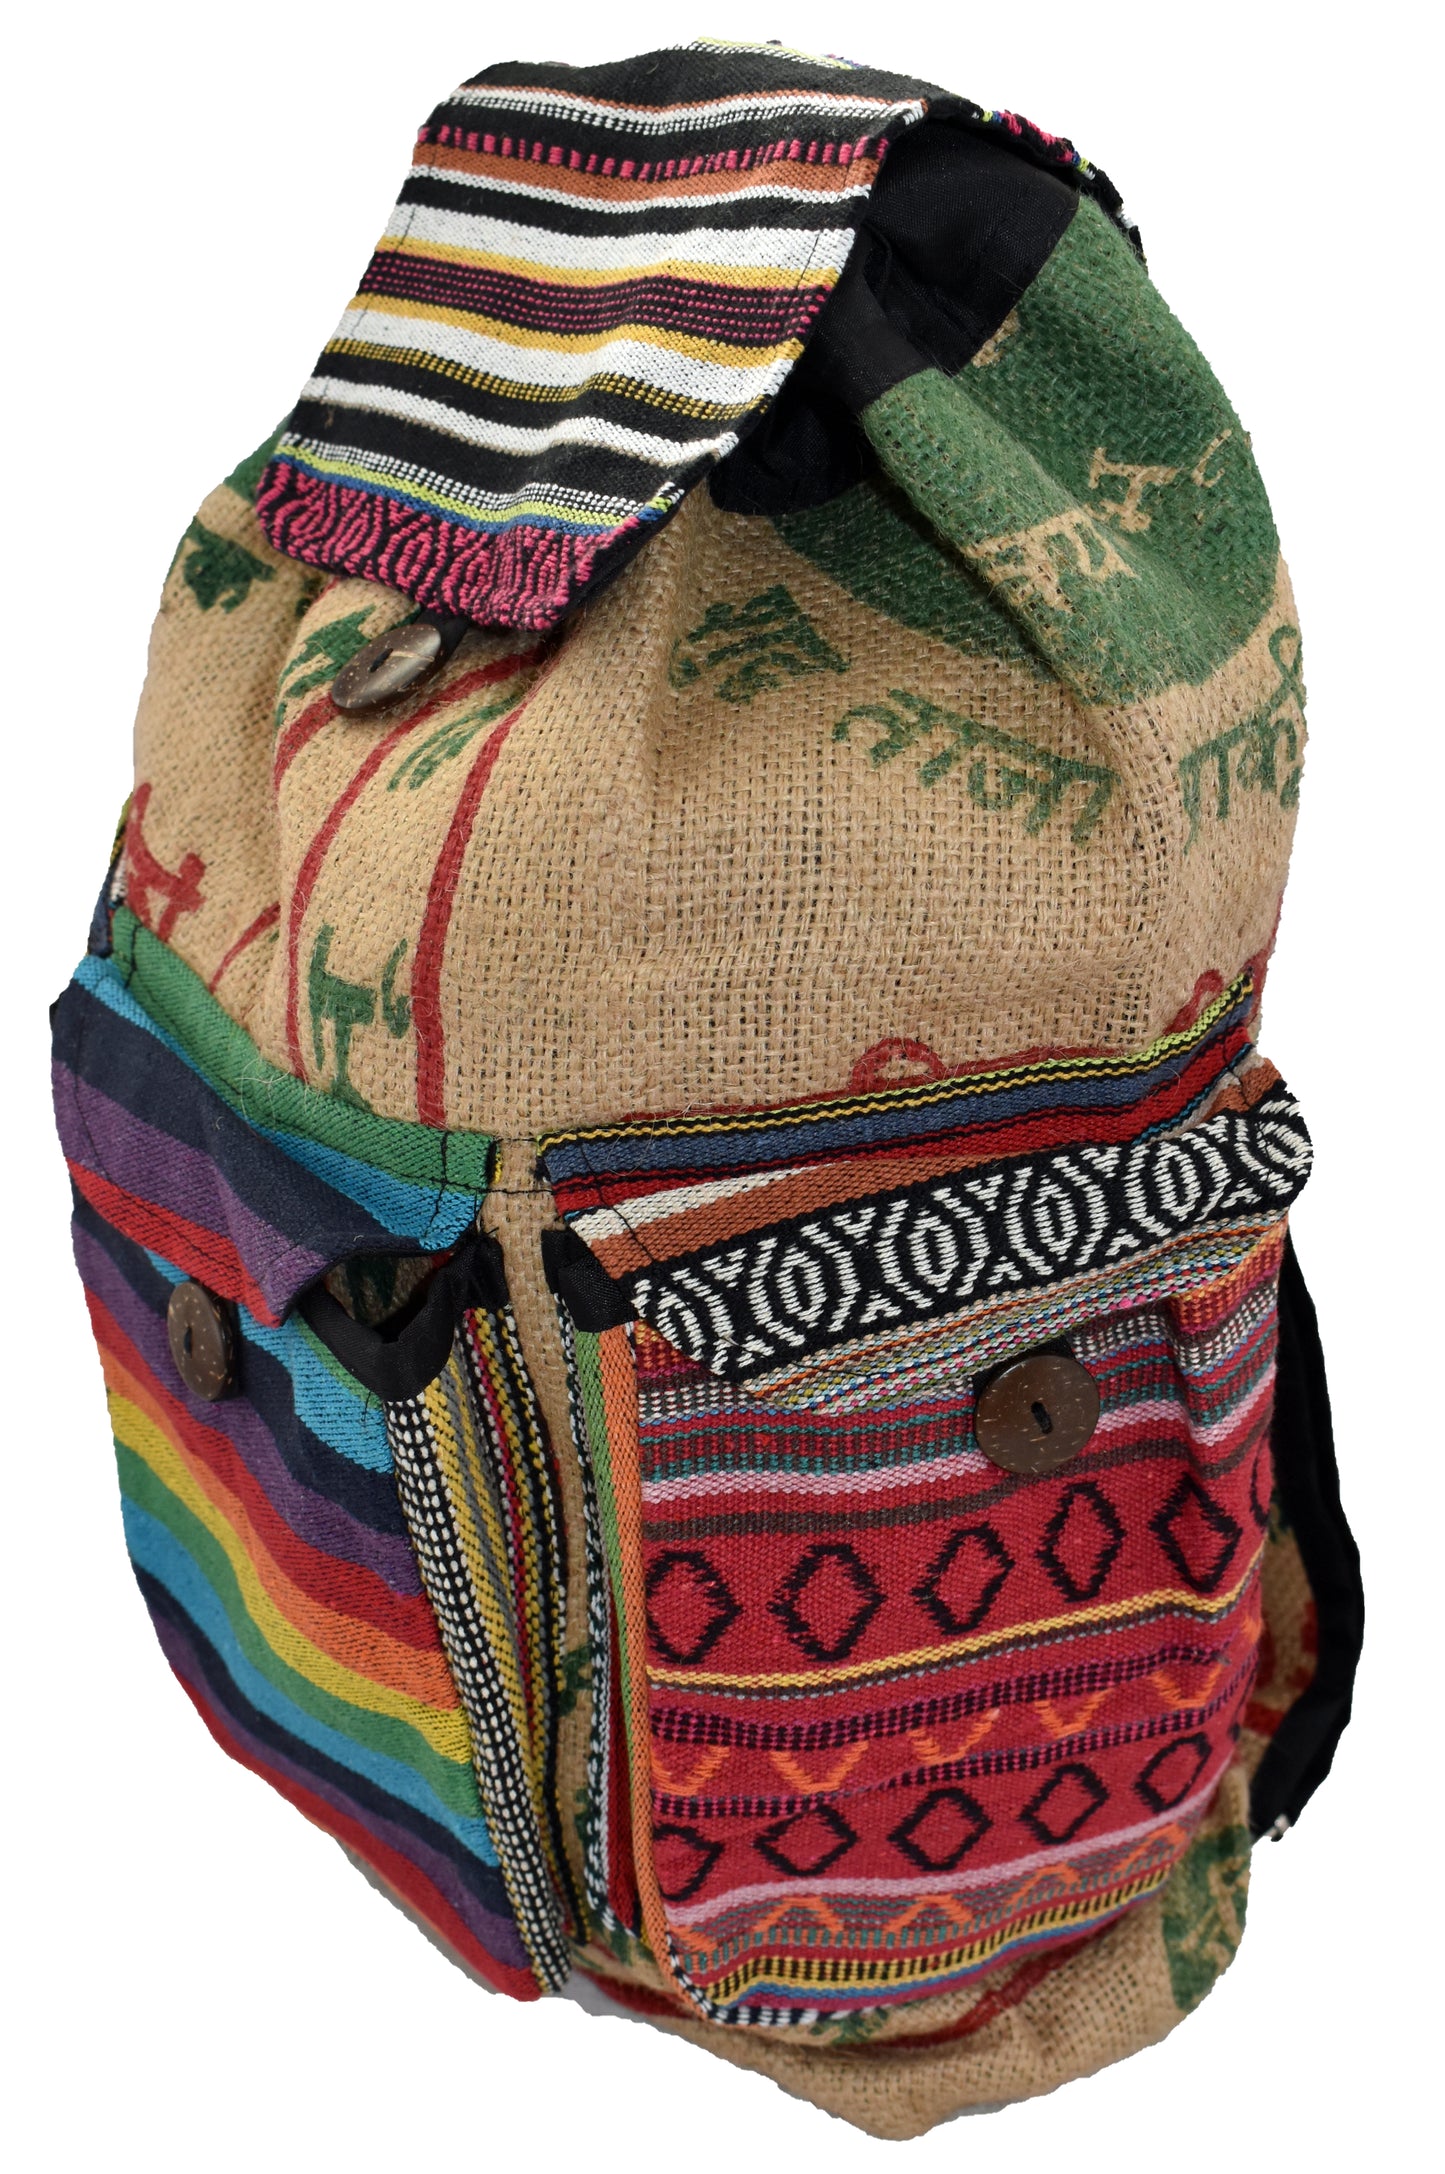 Woven Cotton Rice Sack Back Pack